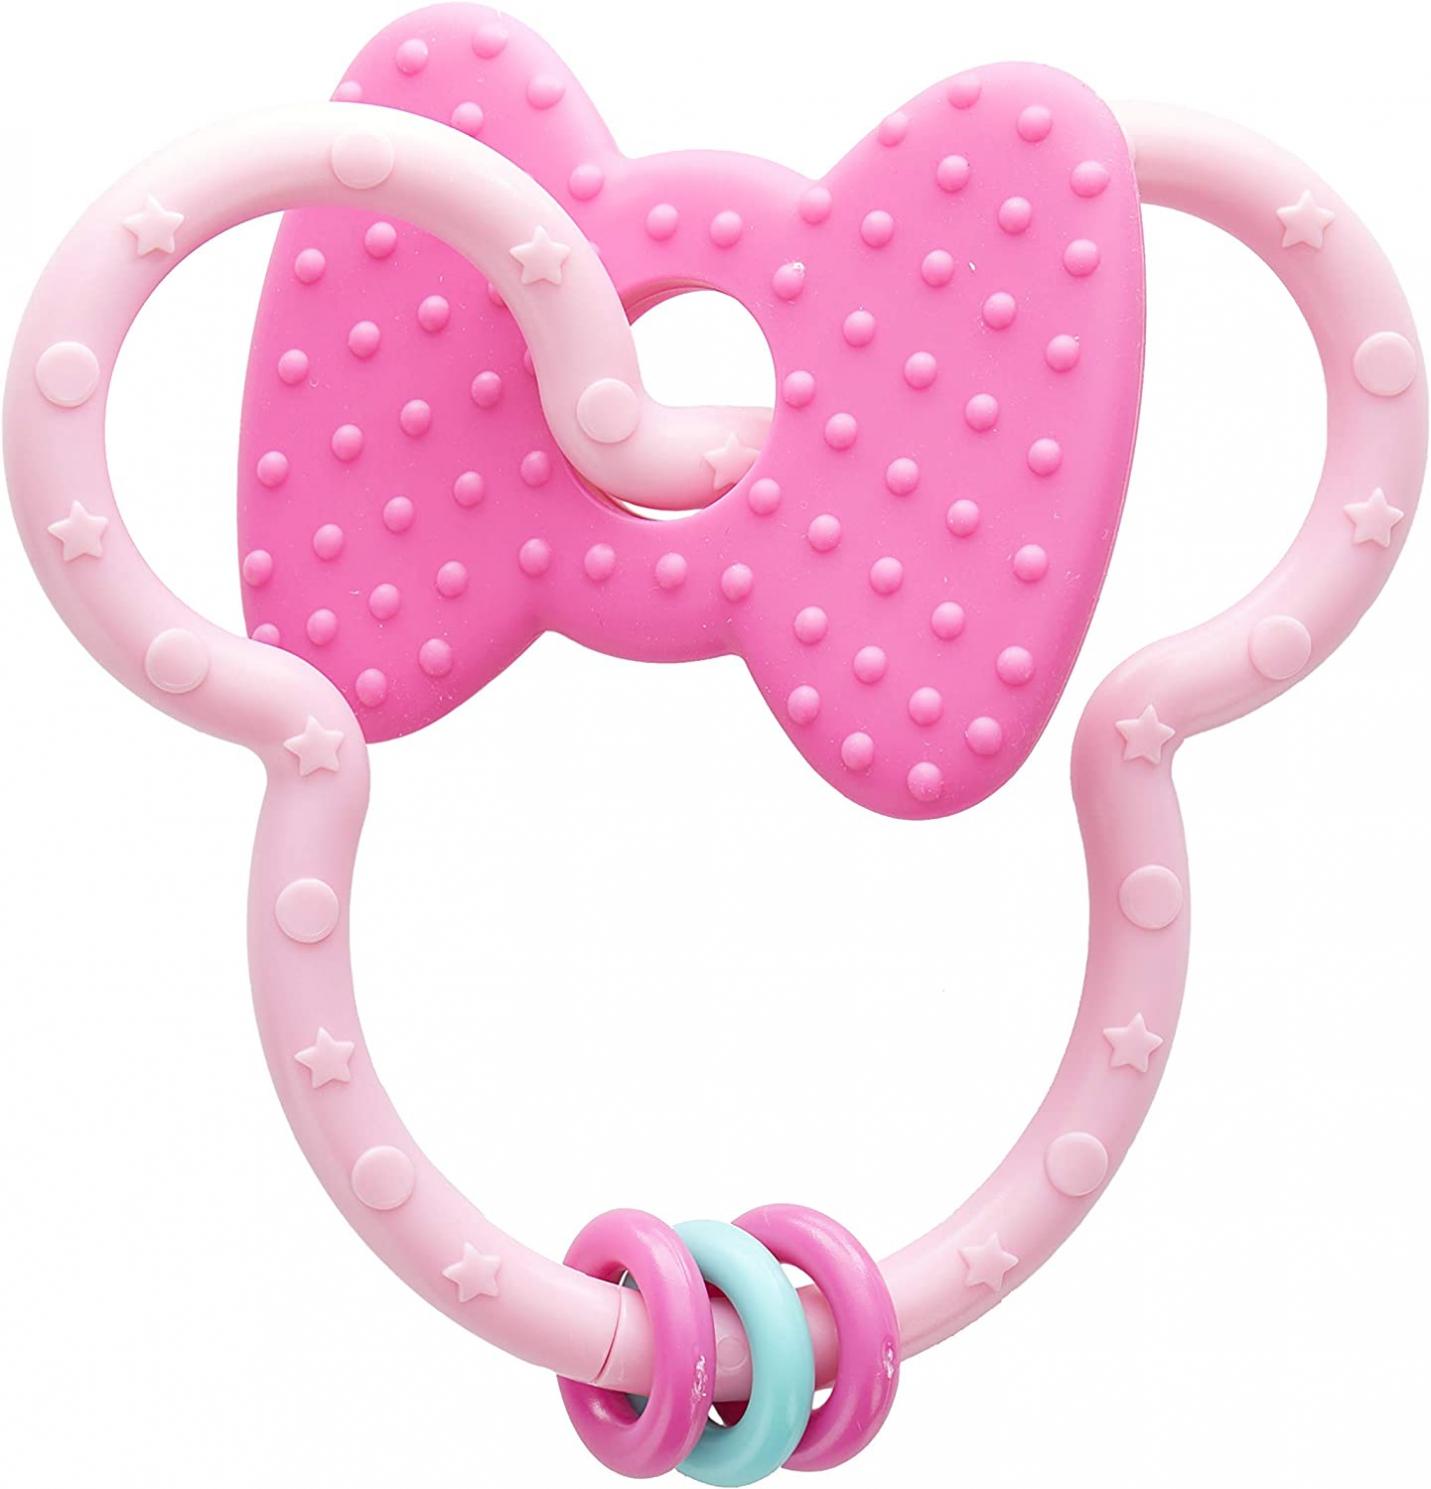 Disney Baby Minnie Mouse Teething Ring Toy